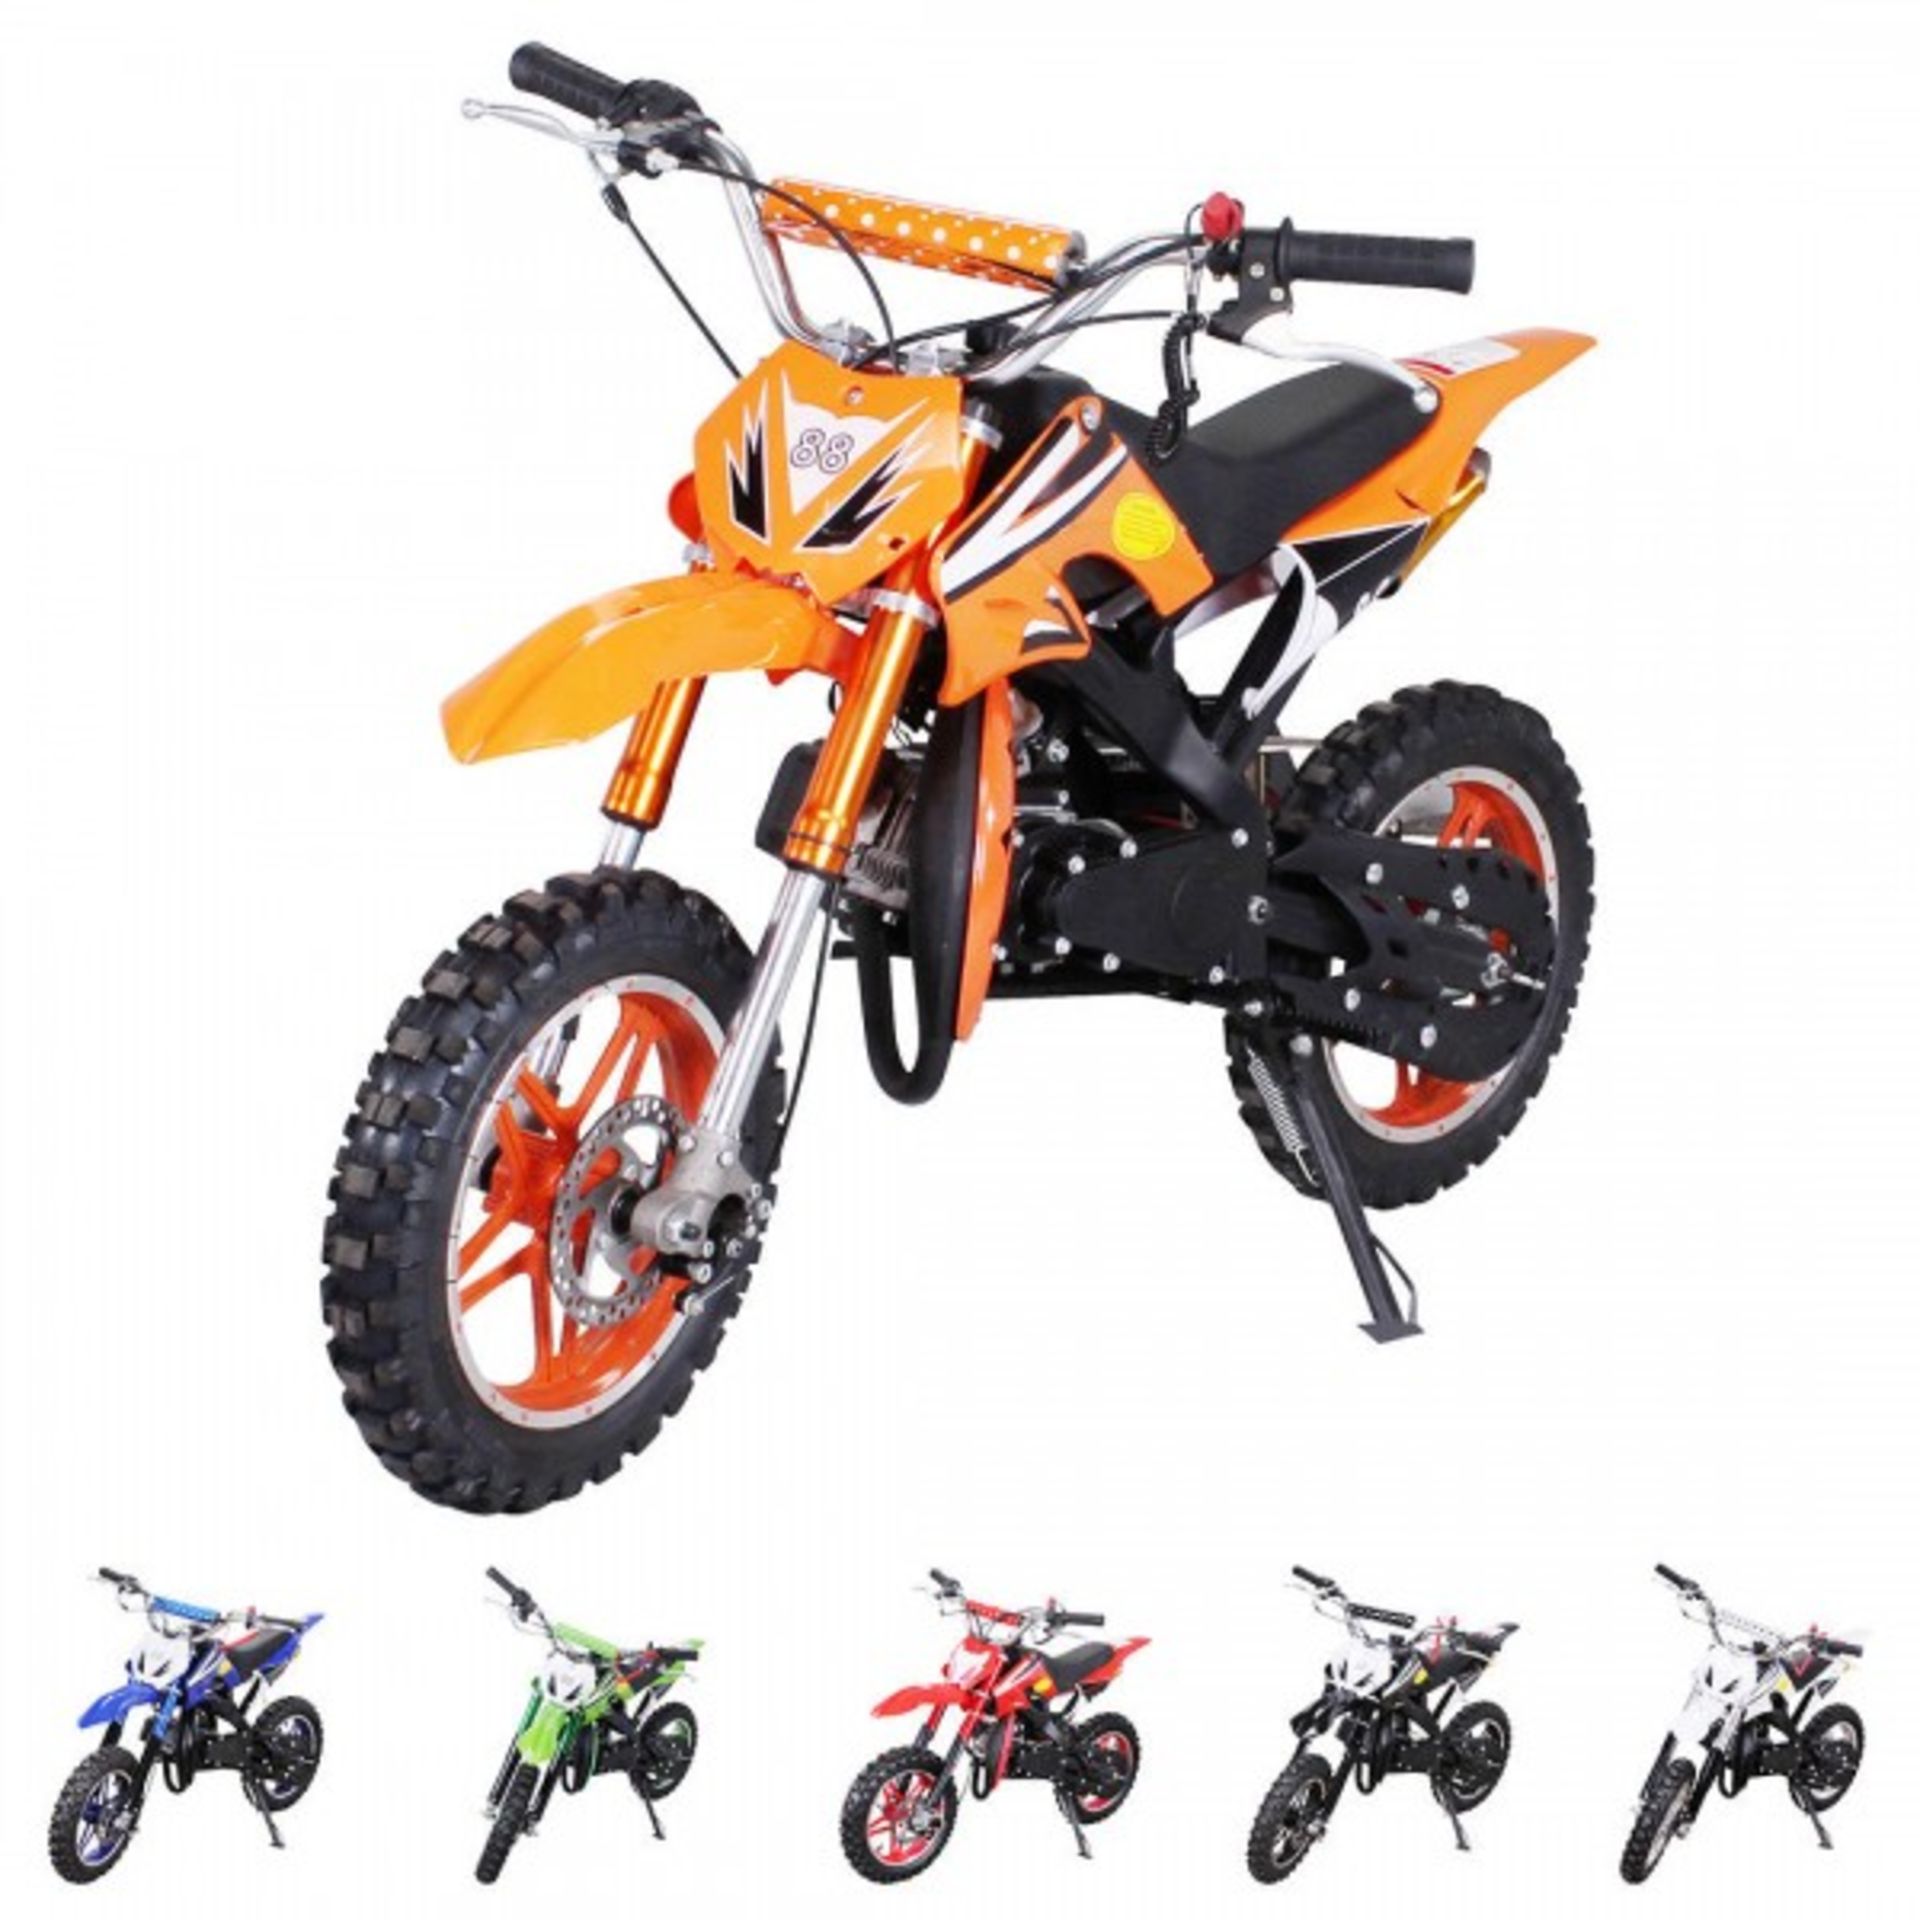 V Brand New 50cc Delta Mini Bike - Colour May Vary - Two Stroke - Single Cylinder - Image 2 of 2